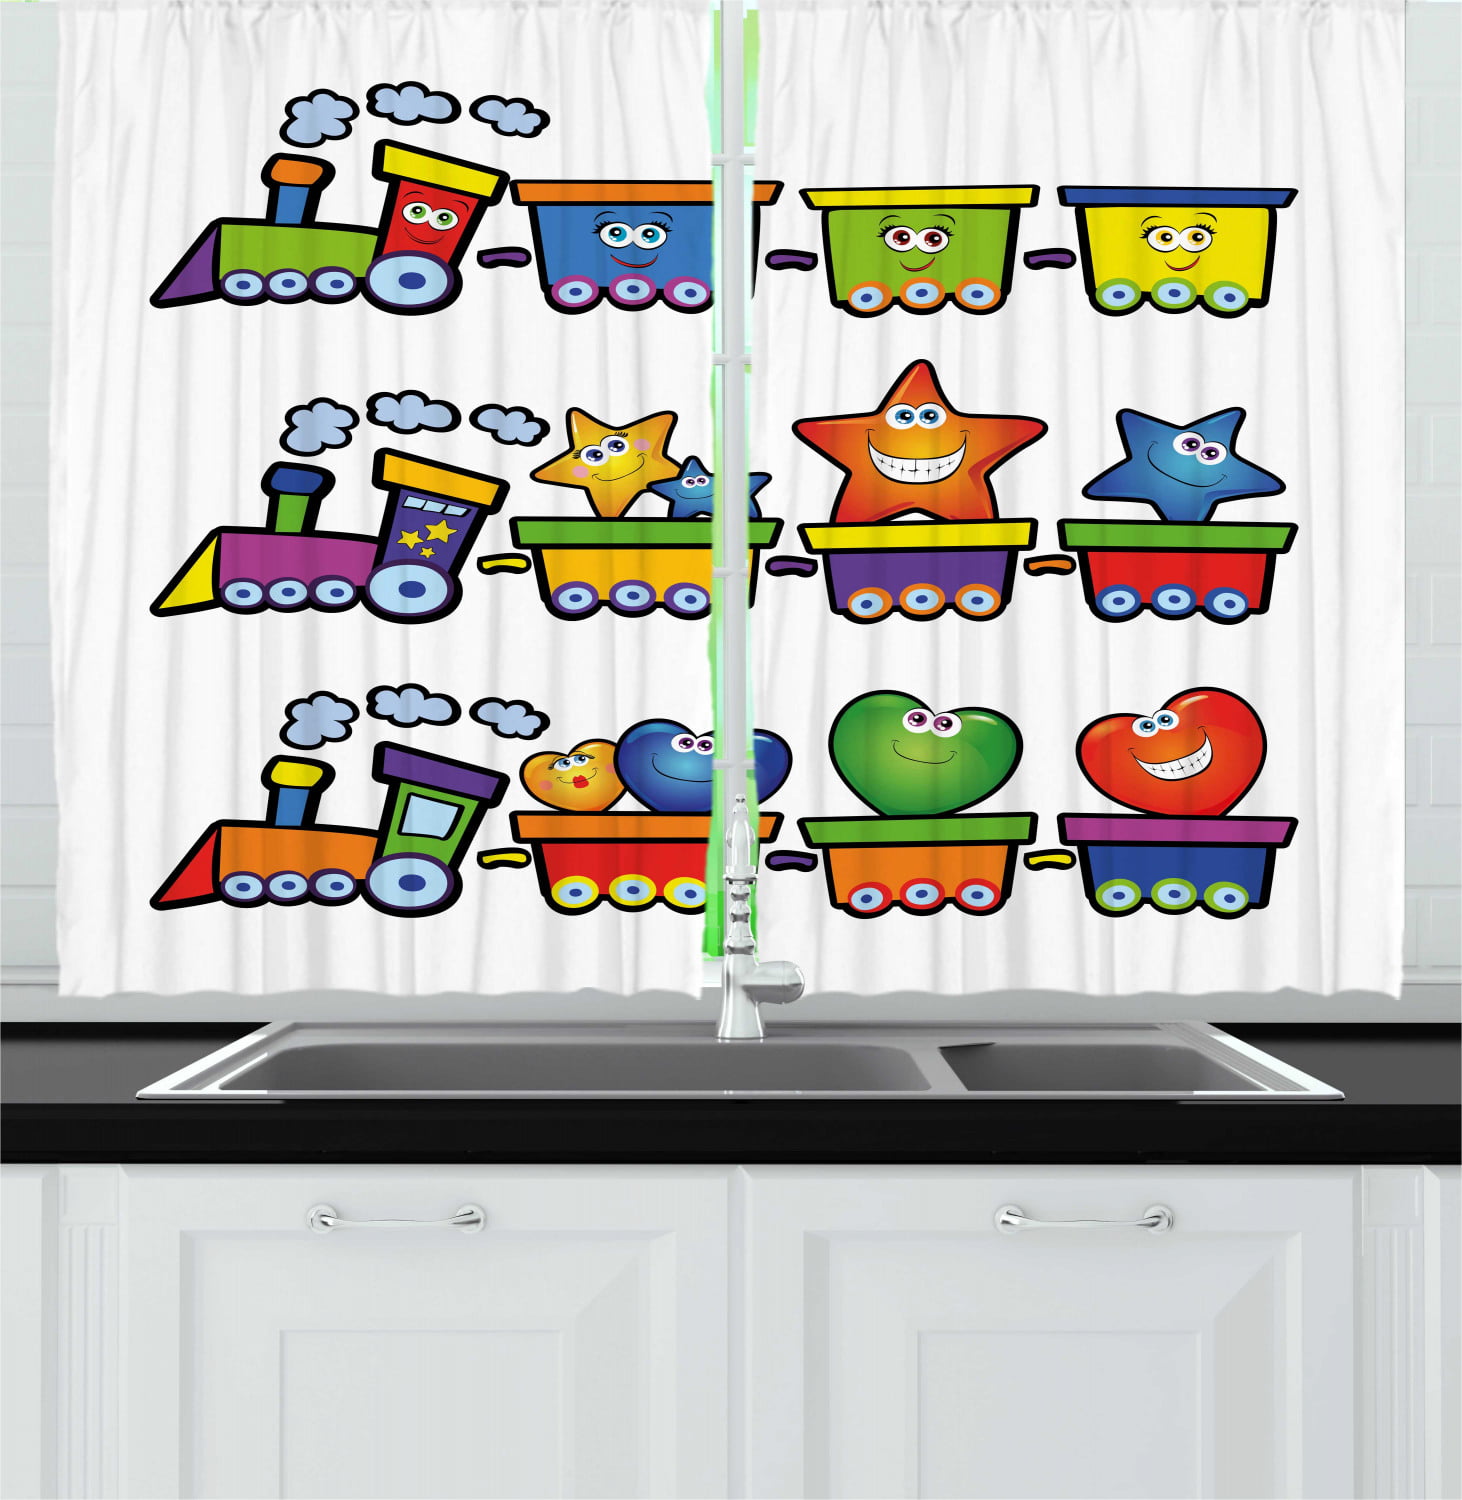 Bedroom Backout Curtain Nursery Trains Loaded with Stars Hearts and Smiles Cheerful Happy Locomotive Cartoon Print waterproof W55x45L Inches Multicolor 